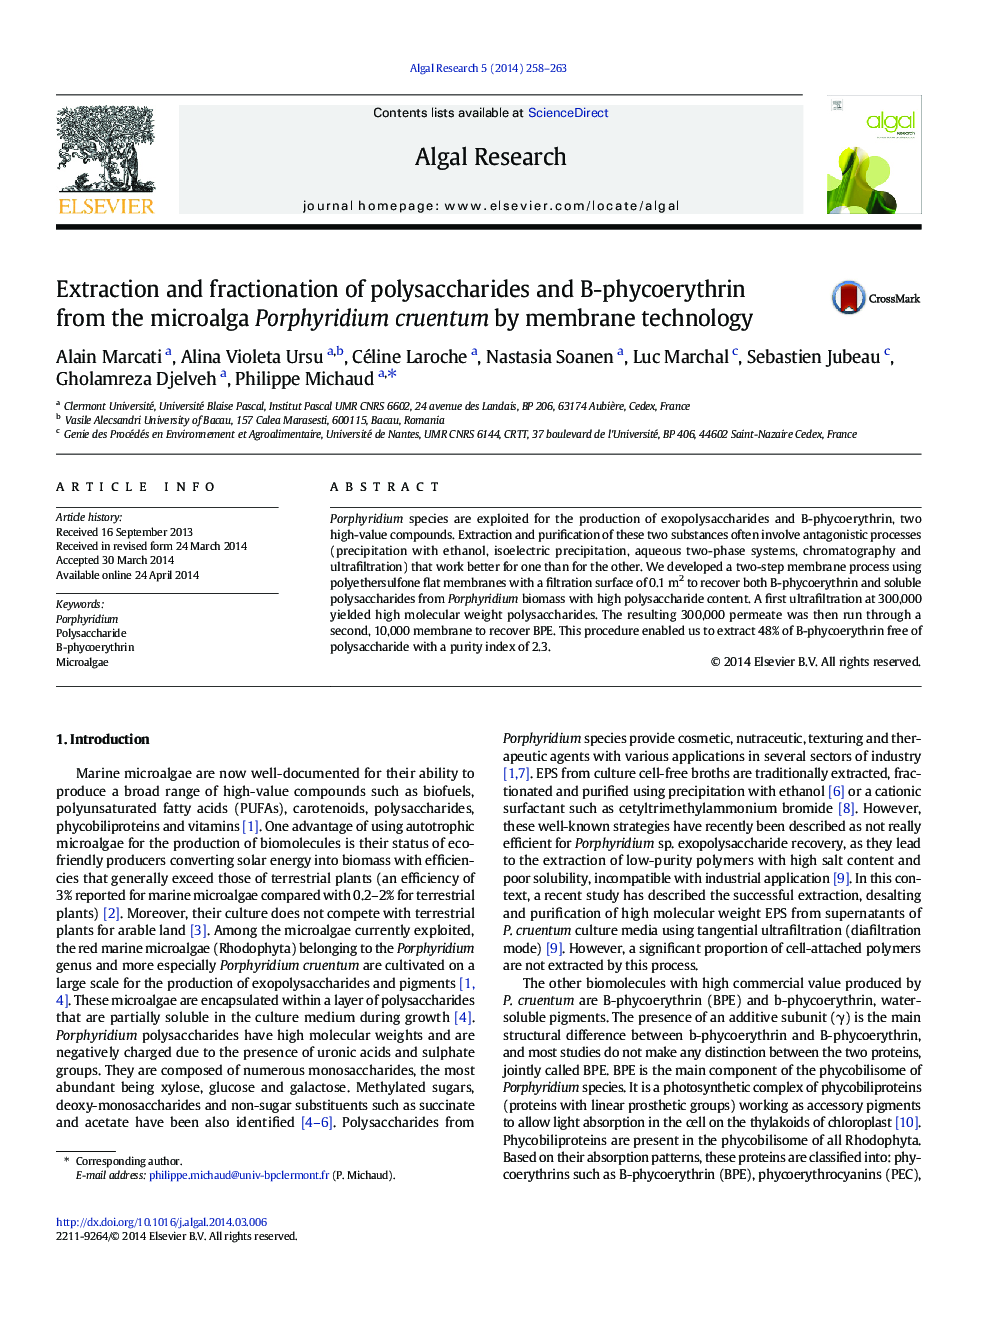 Extraction and fractionation of polysaccharides and B-phycoerythrin from the microalga Porphyridium cruentum by membrane technology